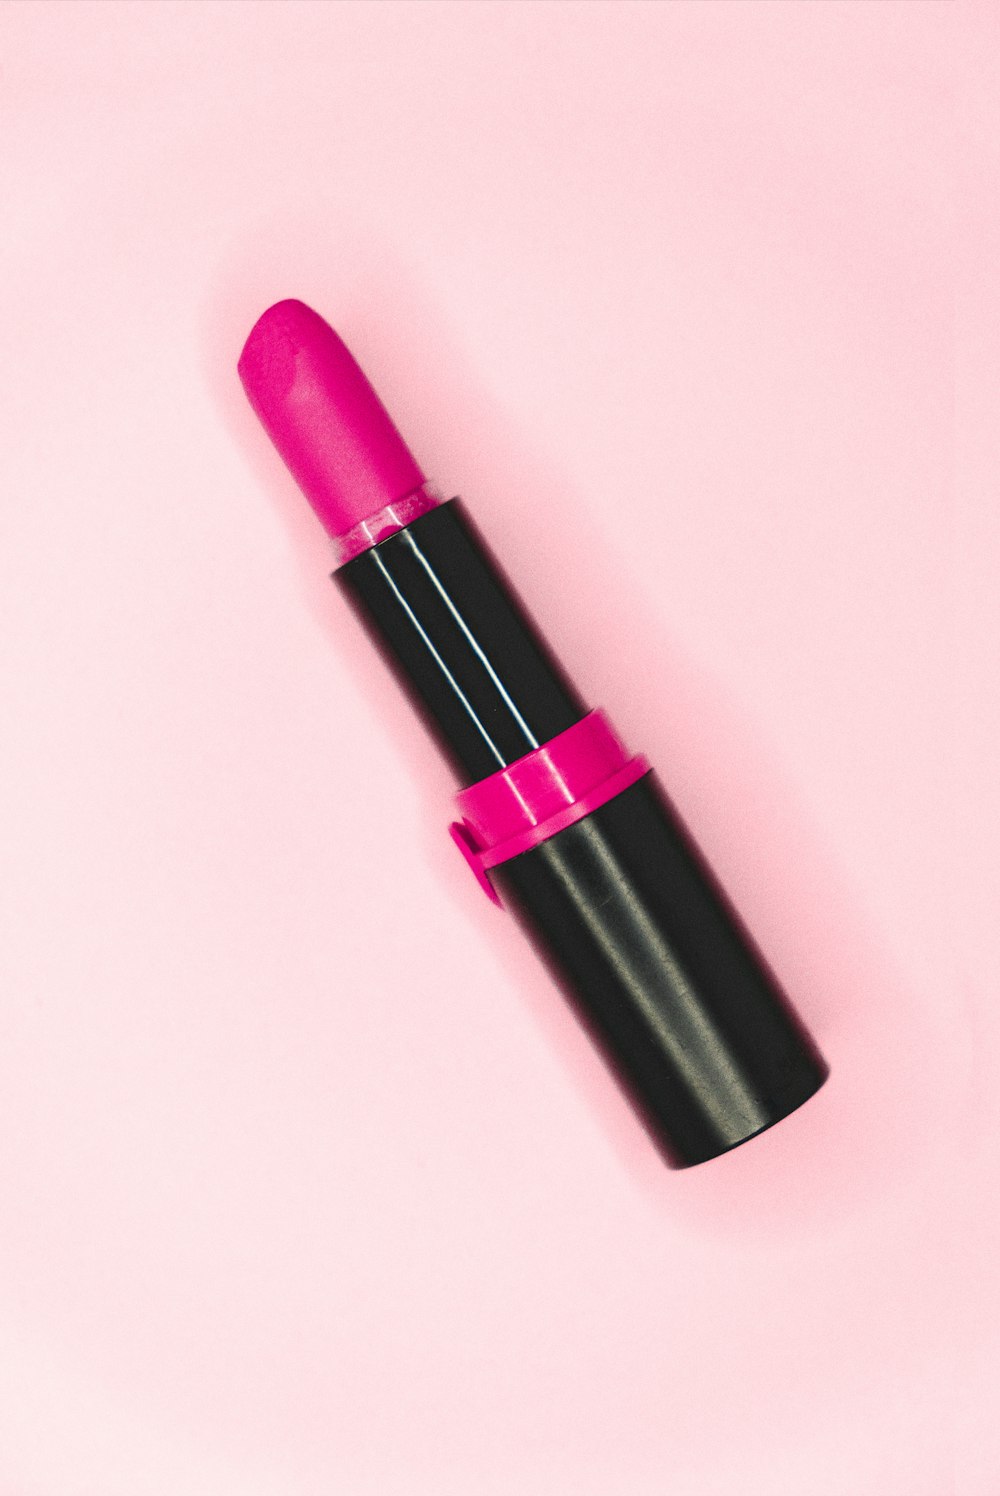 pink lipstick on pink surface